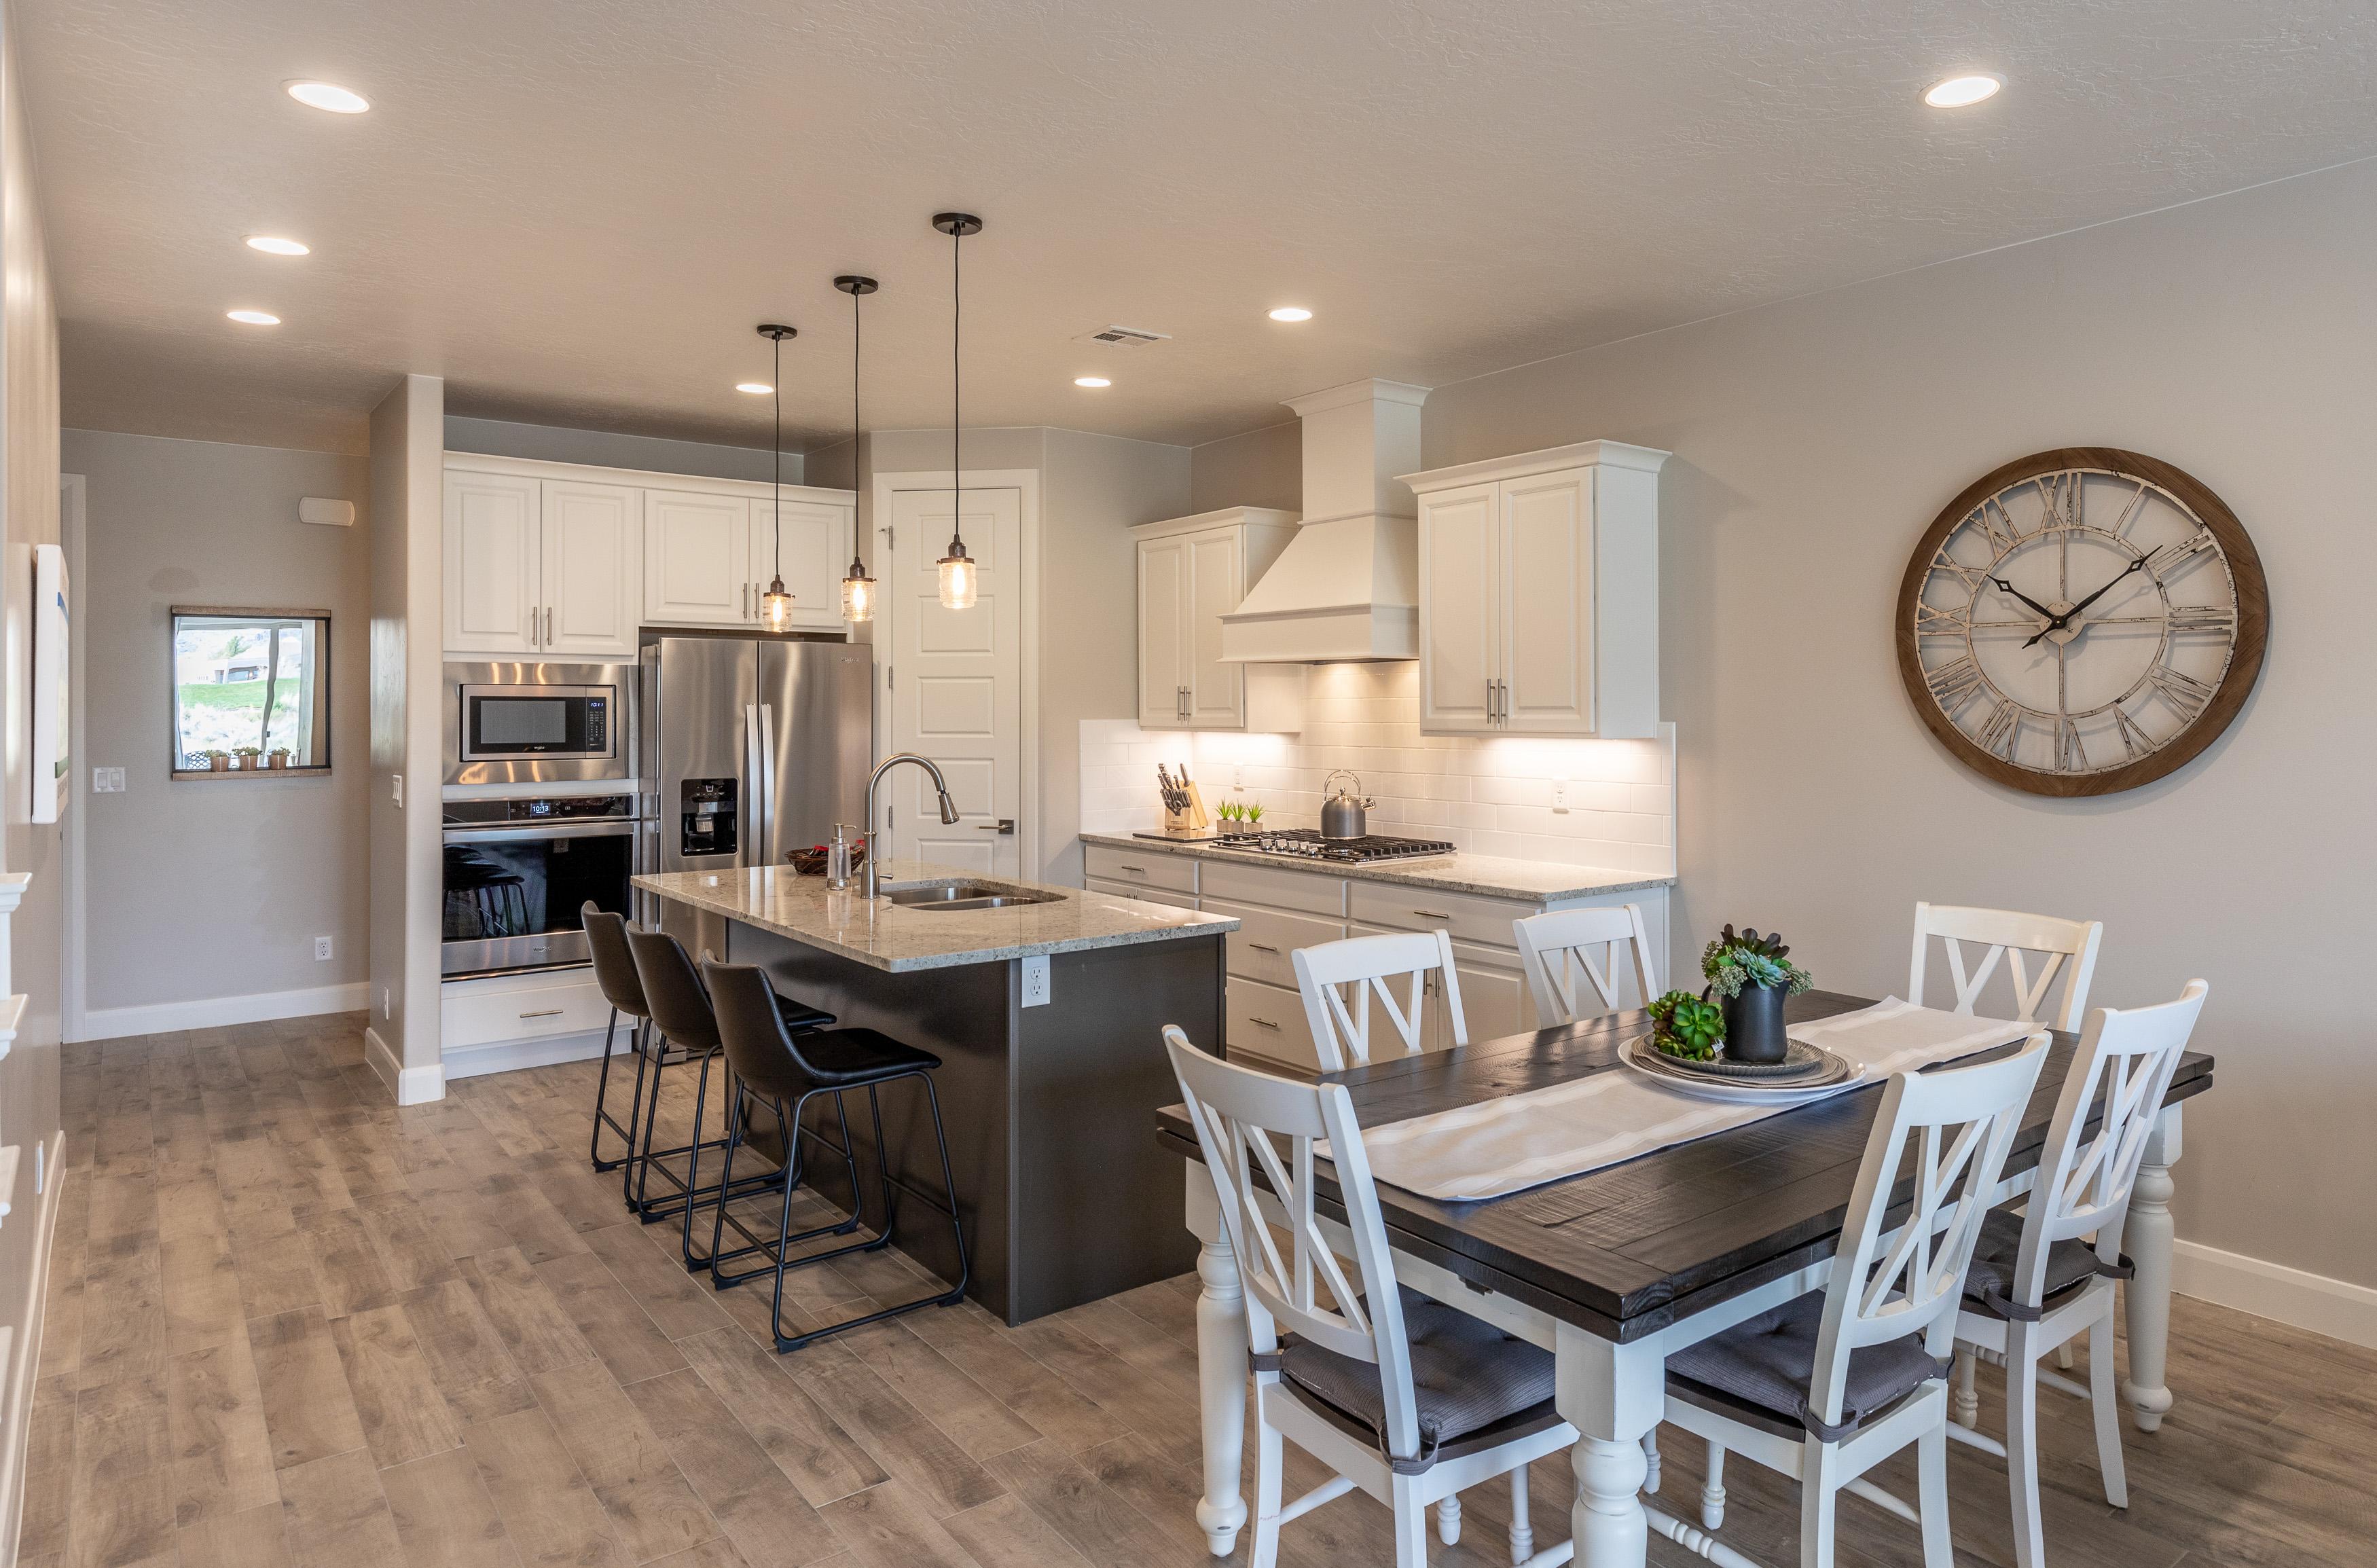 The Kitchen and Dining Table can accommodate 9 adults and is stocked with pots, pans, baking sheets, mixing bowls, plates, bowls, cups, silverware, and a collection of cooking utensils.